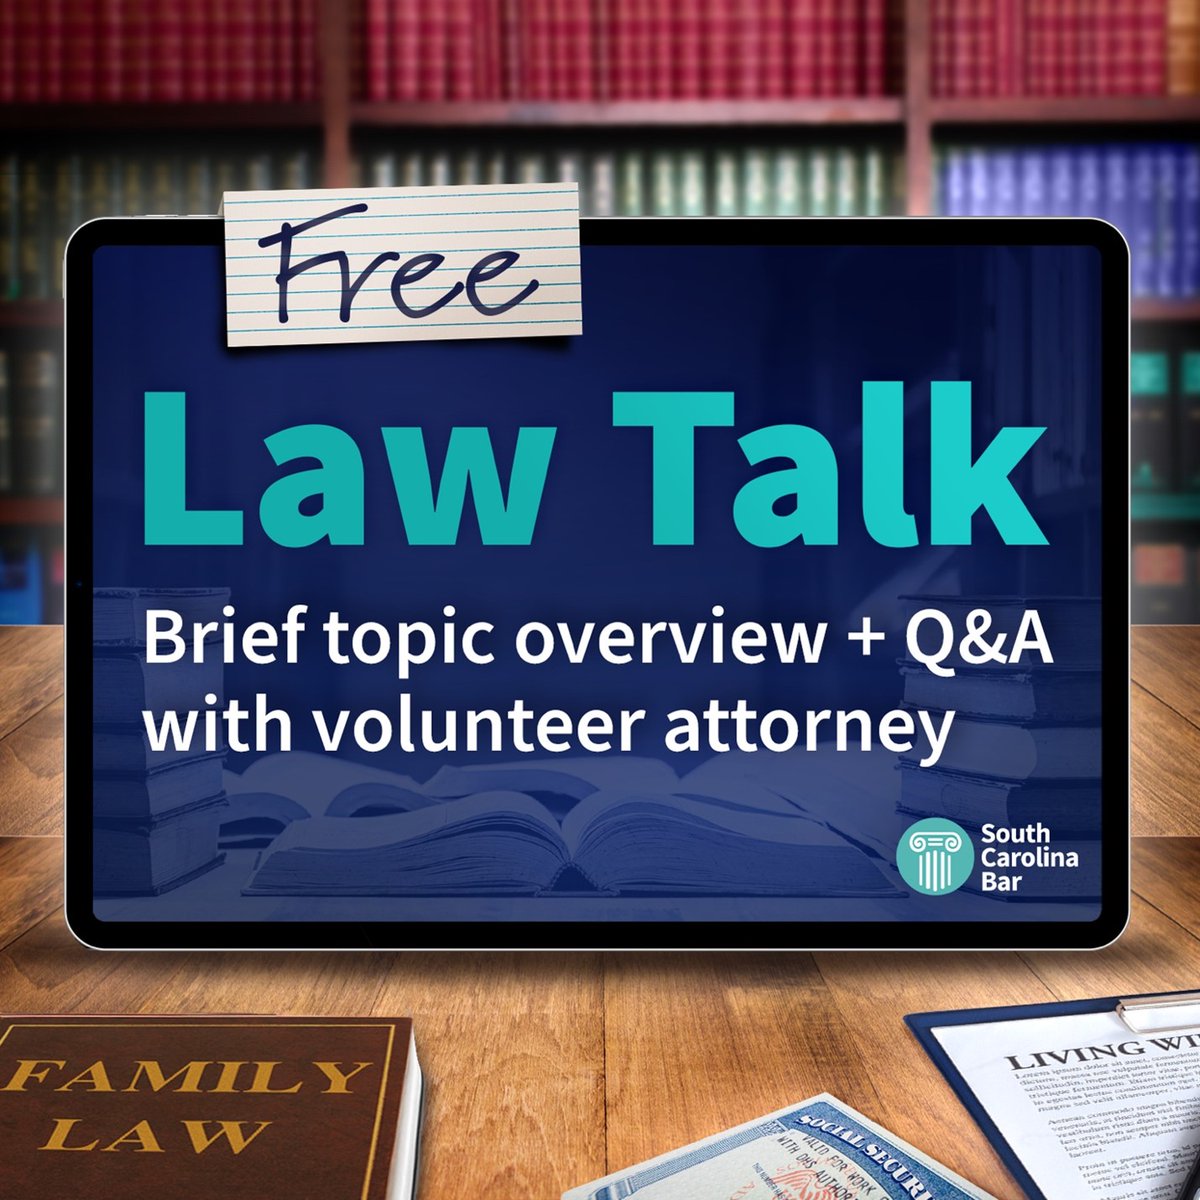 Our next free Law Talk event with the @SCBar covers Wills, Estates, and Probate. Join us at the Middle Tyger Library on Tuesday, March 12 to have your legal questions answered and keep your eyes 👀 peeled for upcoming topics.